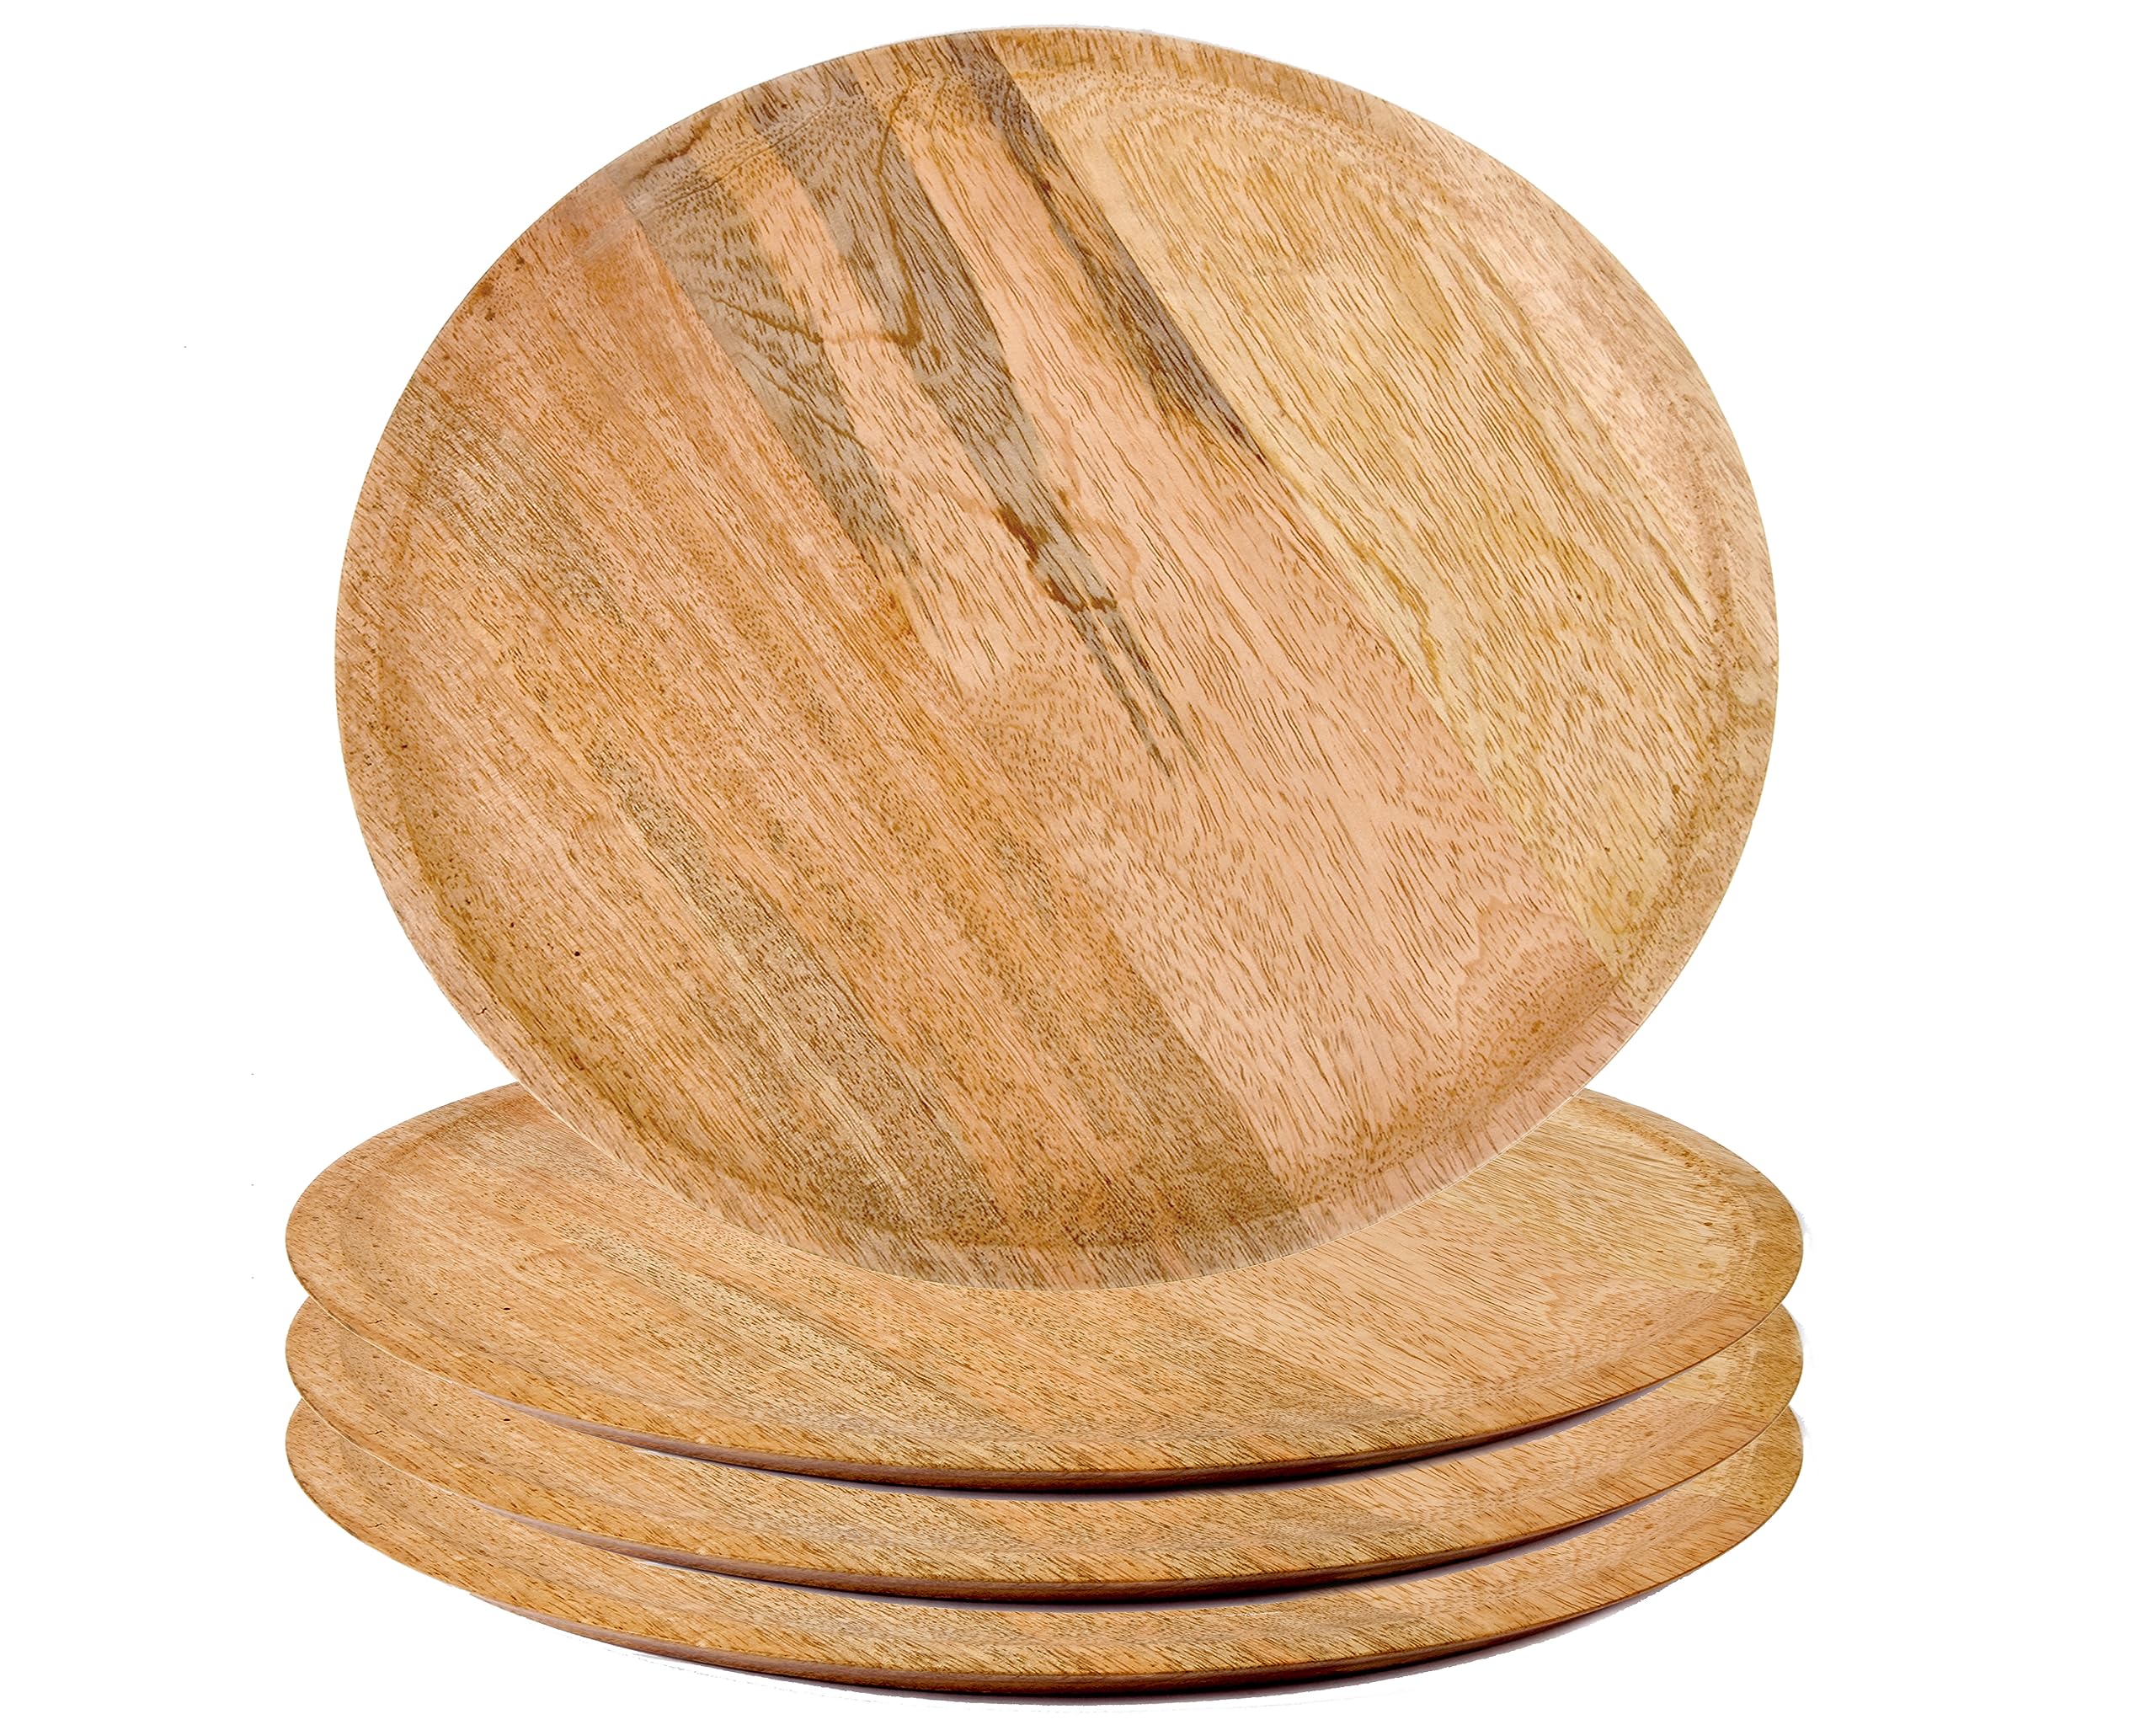 Alpha Living Home wood appetizer plate, wood appetizer plate sets, wood chargers for dinner plates, wood placemats, chargers for